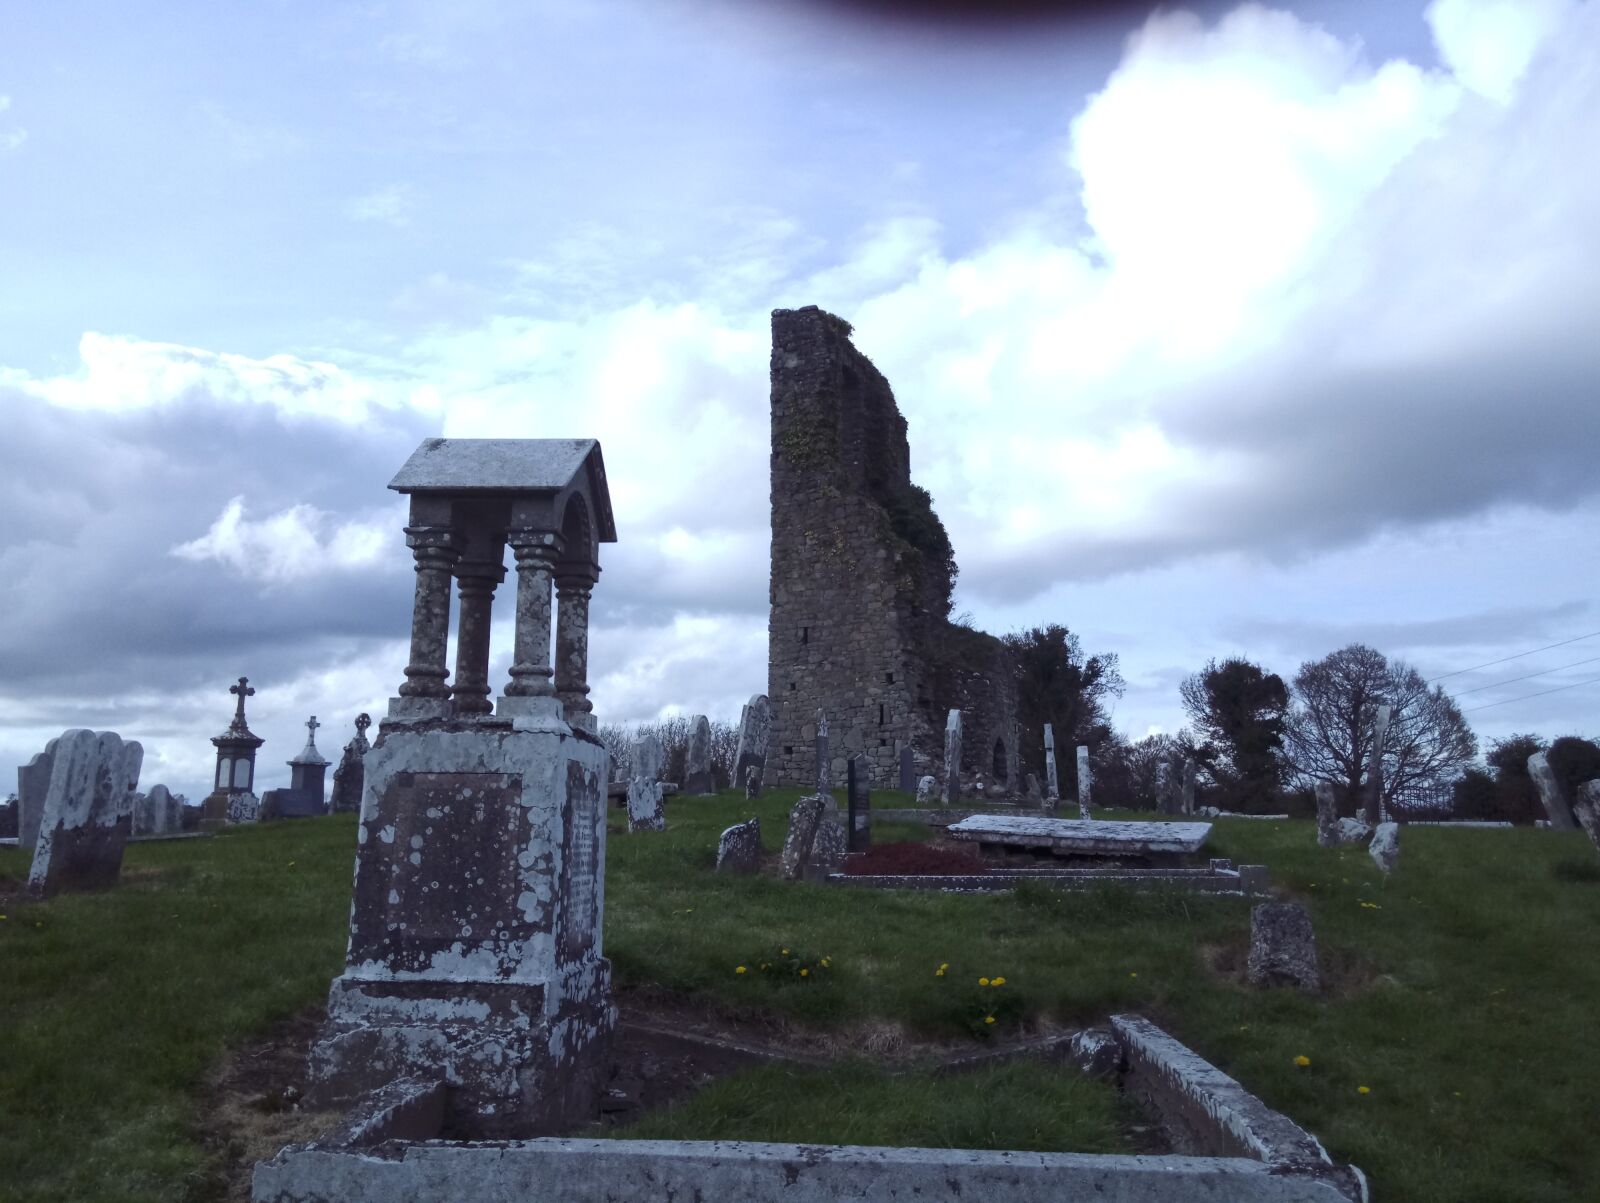 HTC ONE A9S sample photo. Ruins, graveyard, ireland photography